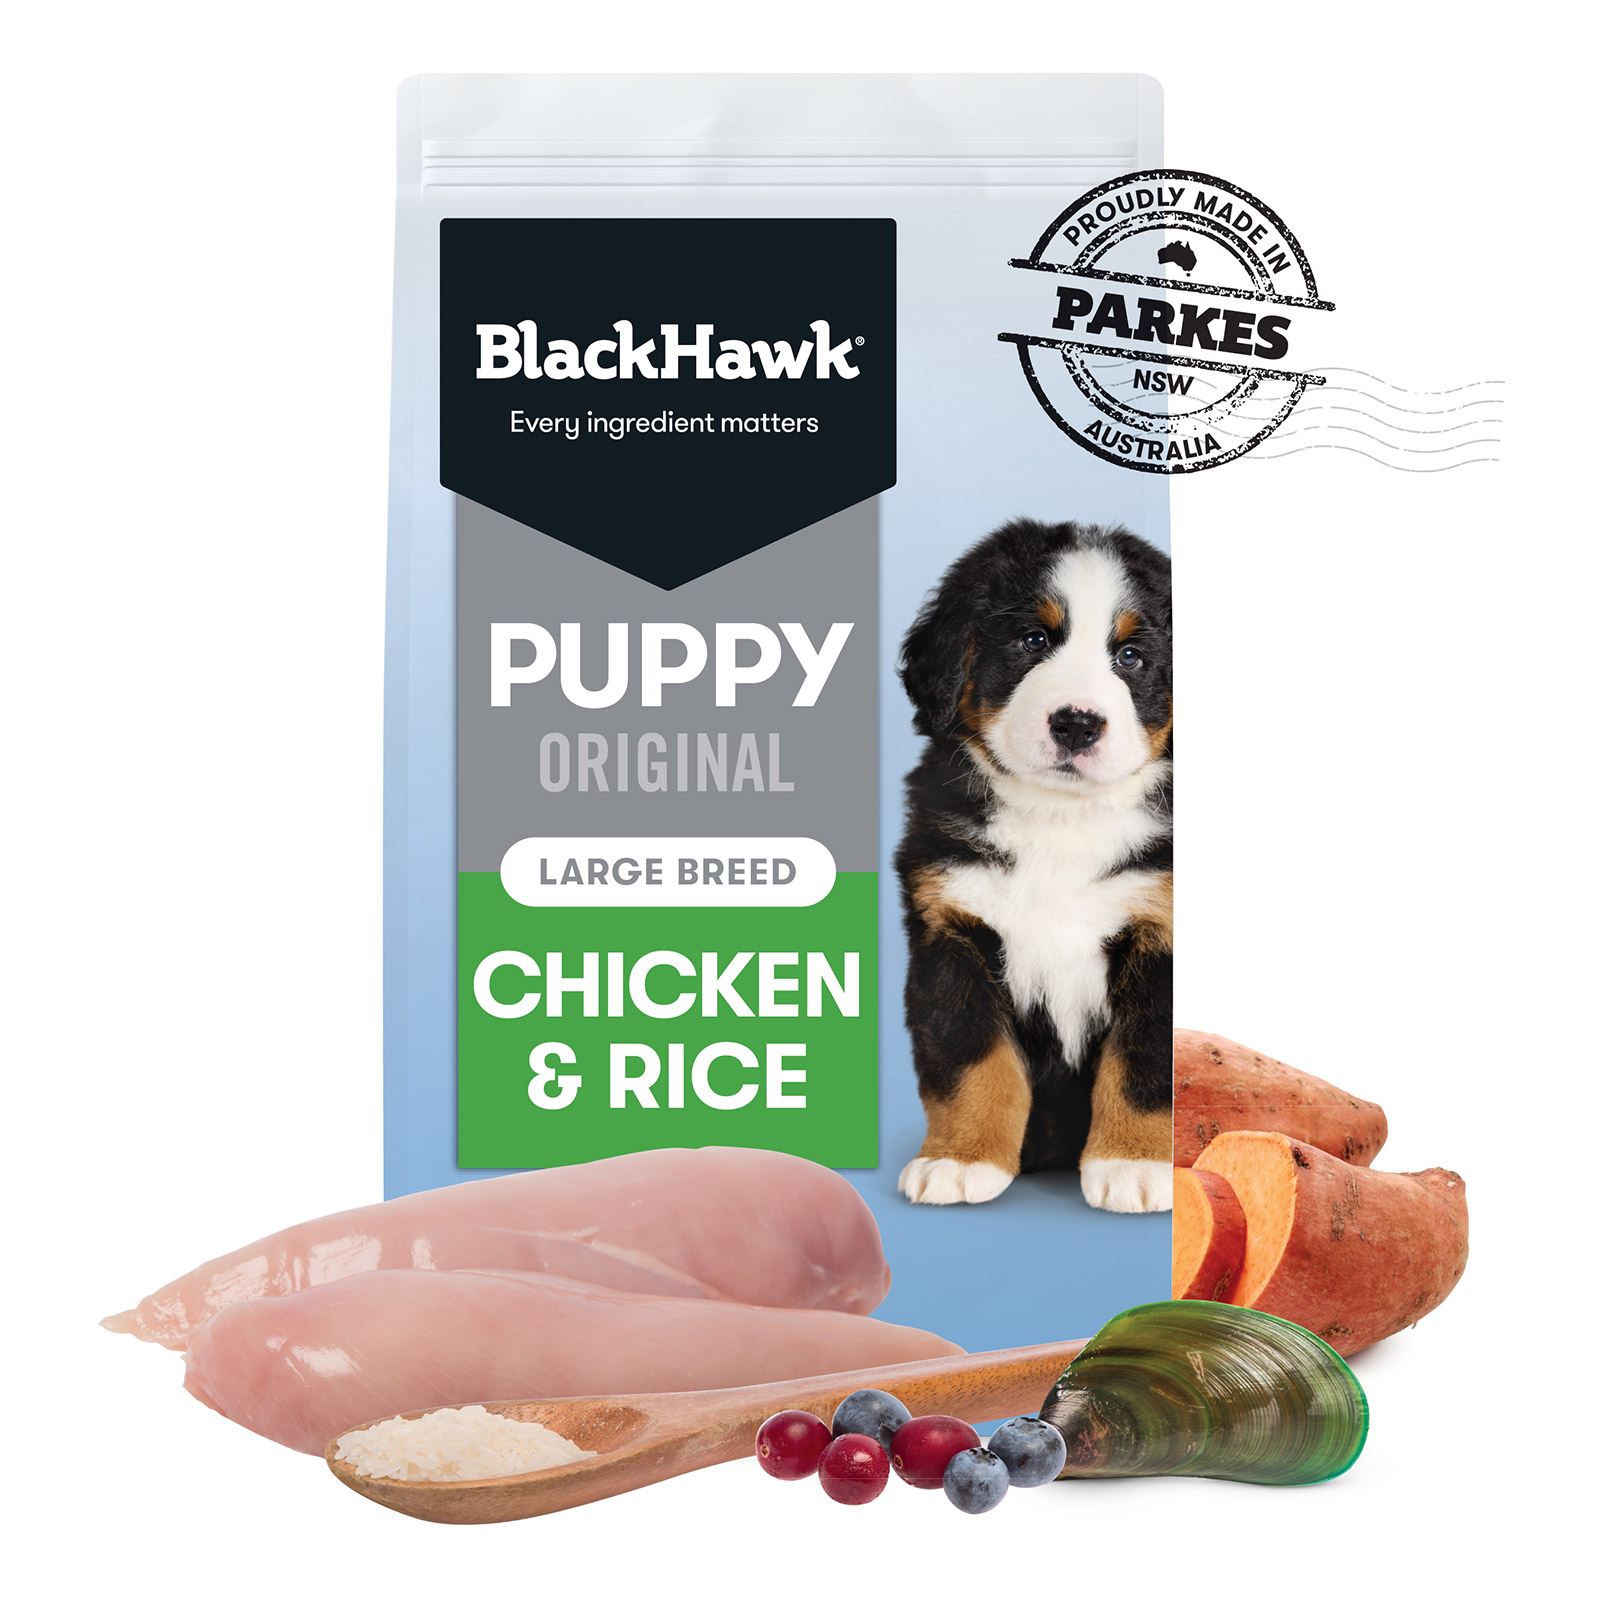 Black Hawk Puppy Original Large Breed Chicken and Rice for Food